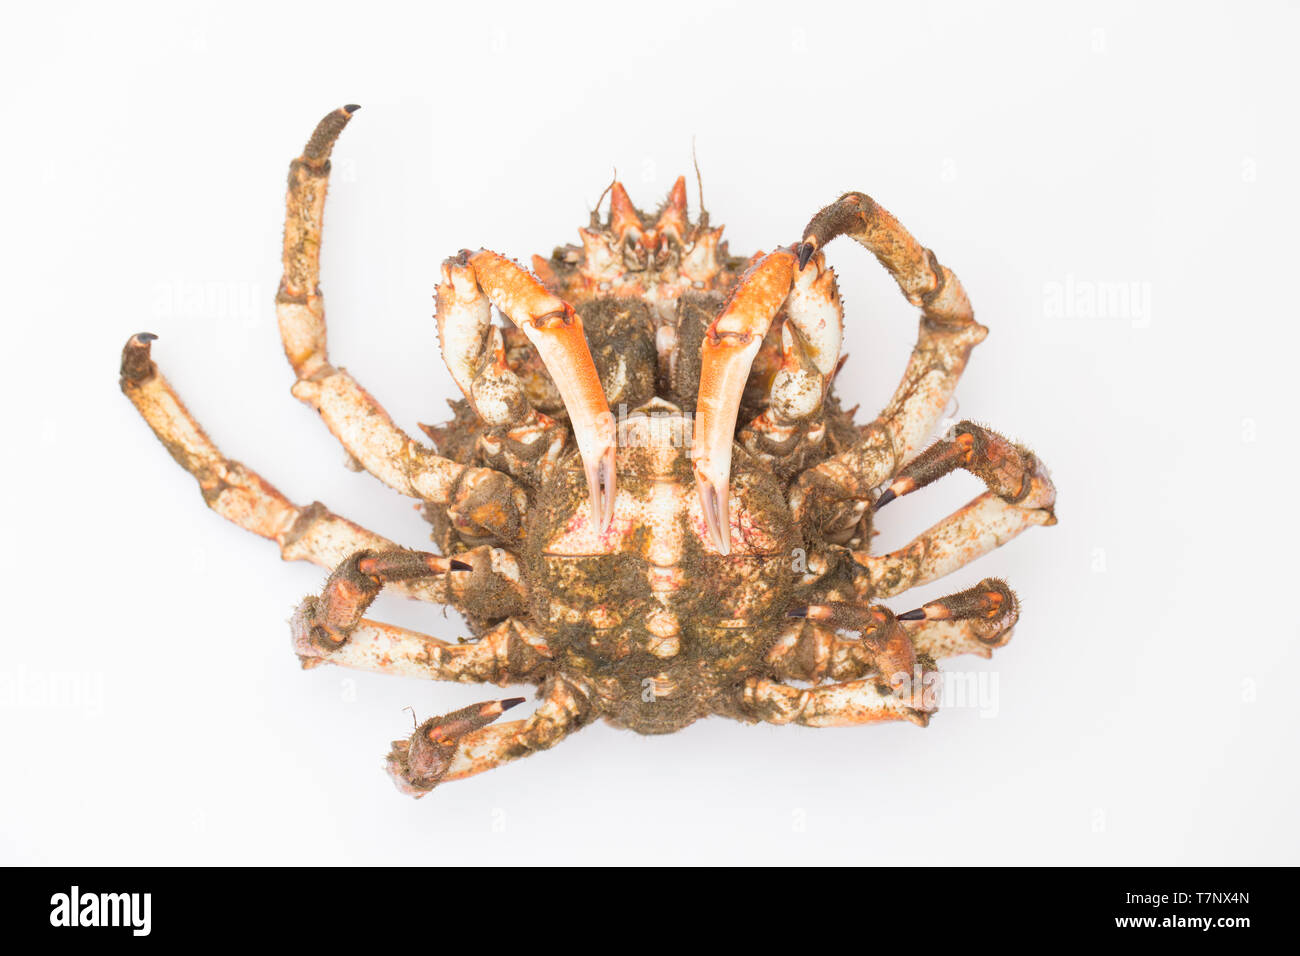 An uncooked female, or hen, spider crab, Maja brachydactyla, that was caught in a drop net baited with a pollack’s head near Weymouth in Dorset Englan Stock Photo